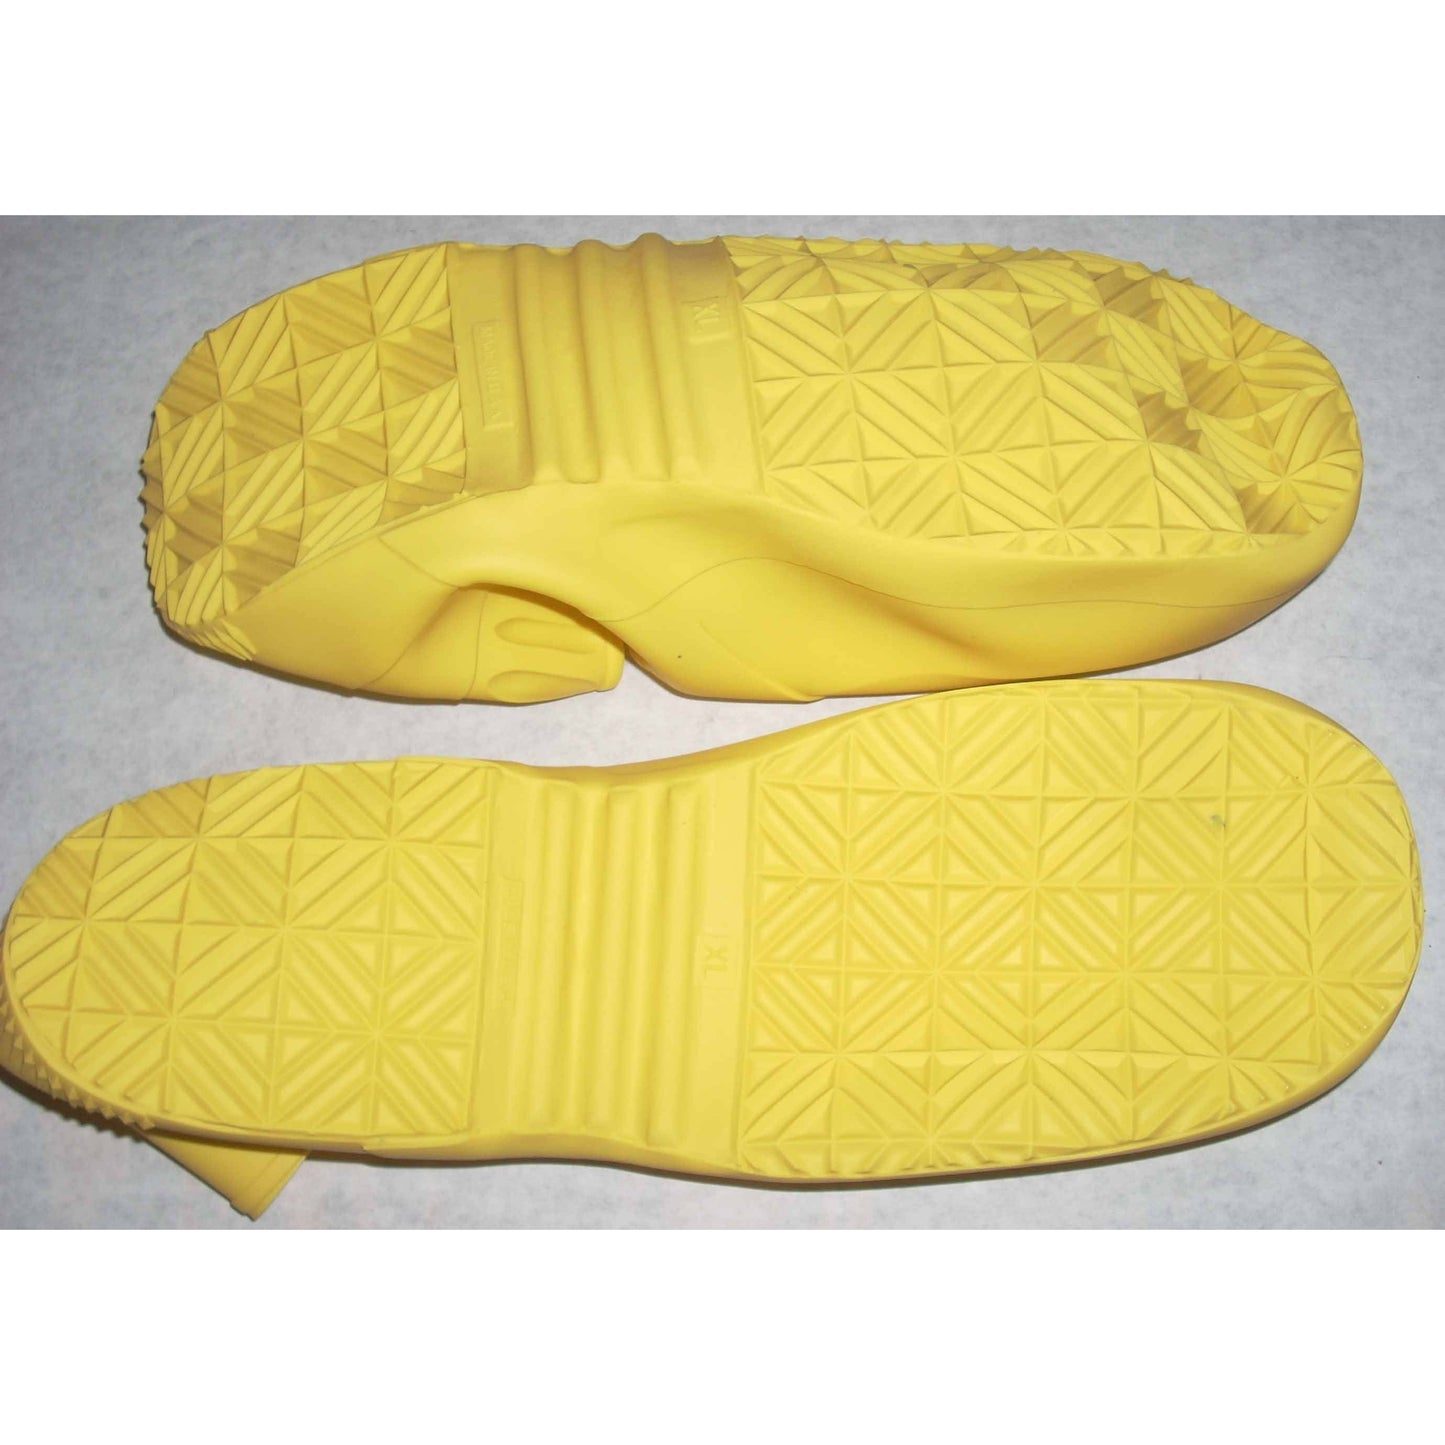 Lacrosse 88103 Men's Packer Yellow Overshoe Size XL 11-12 1/2 USA Made